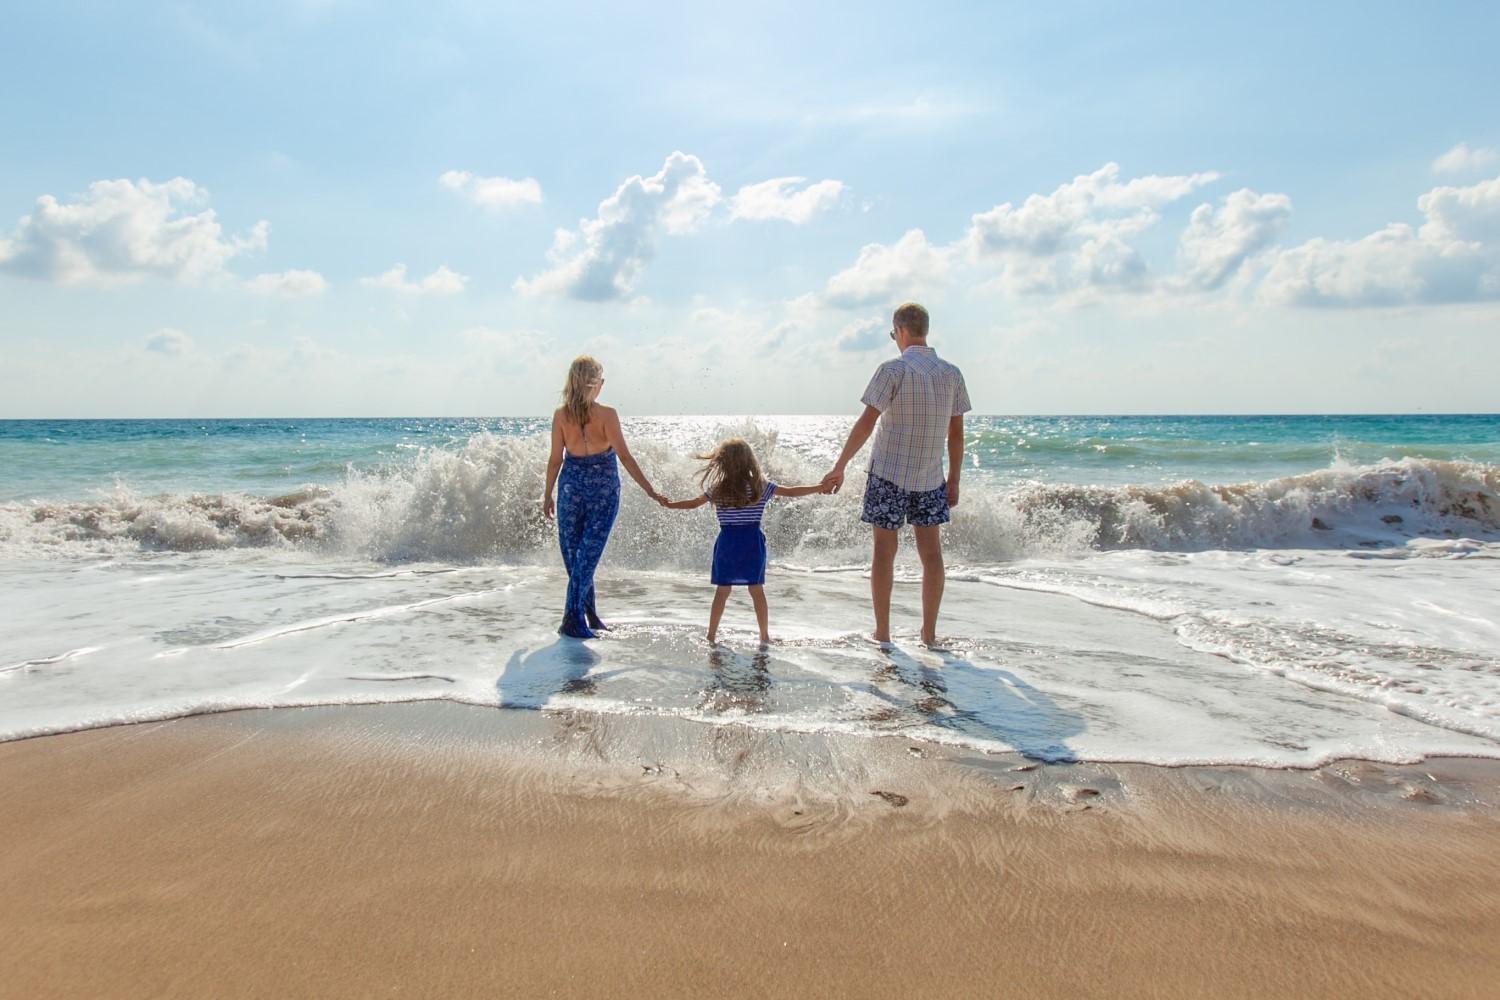 A family walking on the beach

Description automatically generated with medium confidence